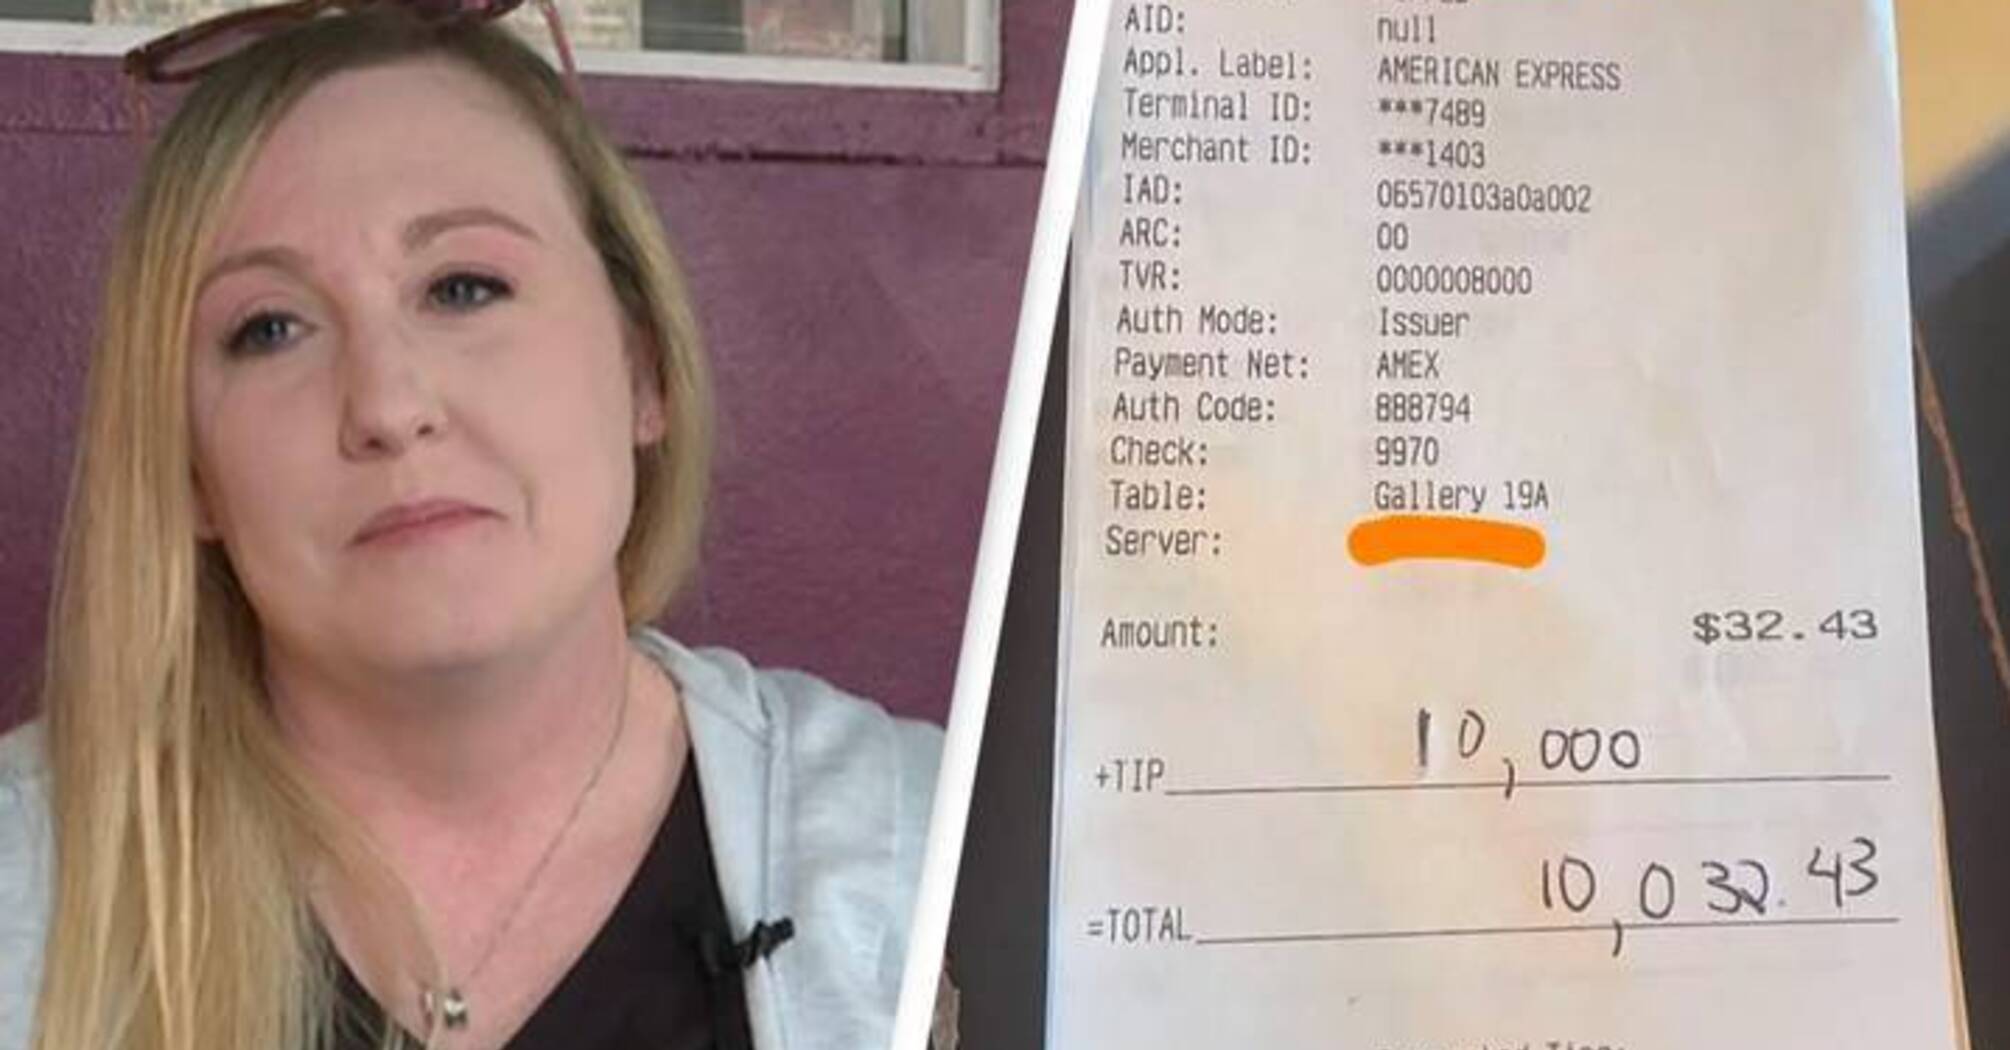 Waitress fired after receiving $10,000 in tips